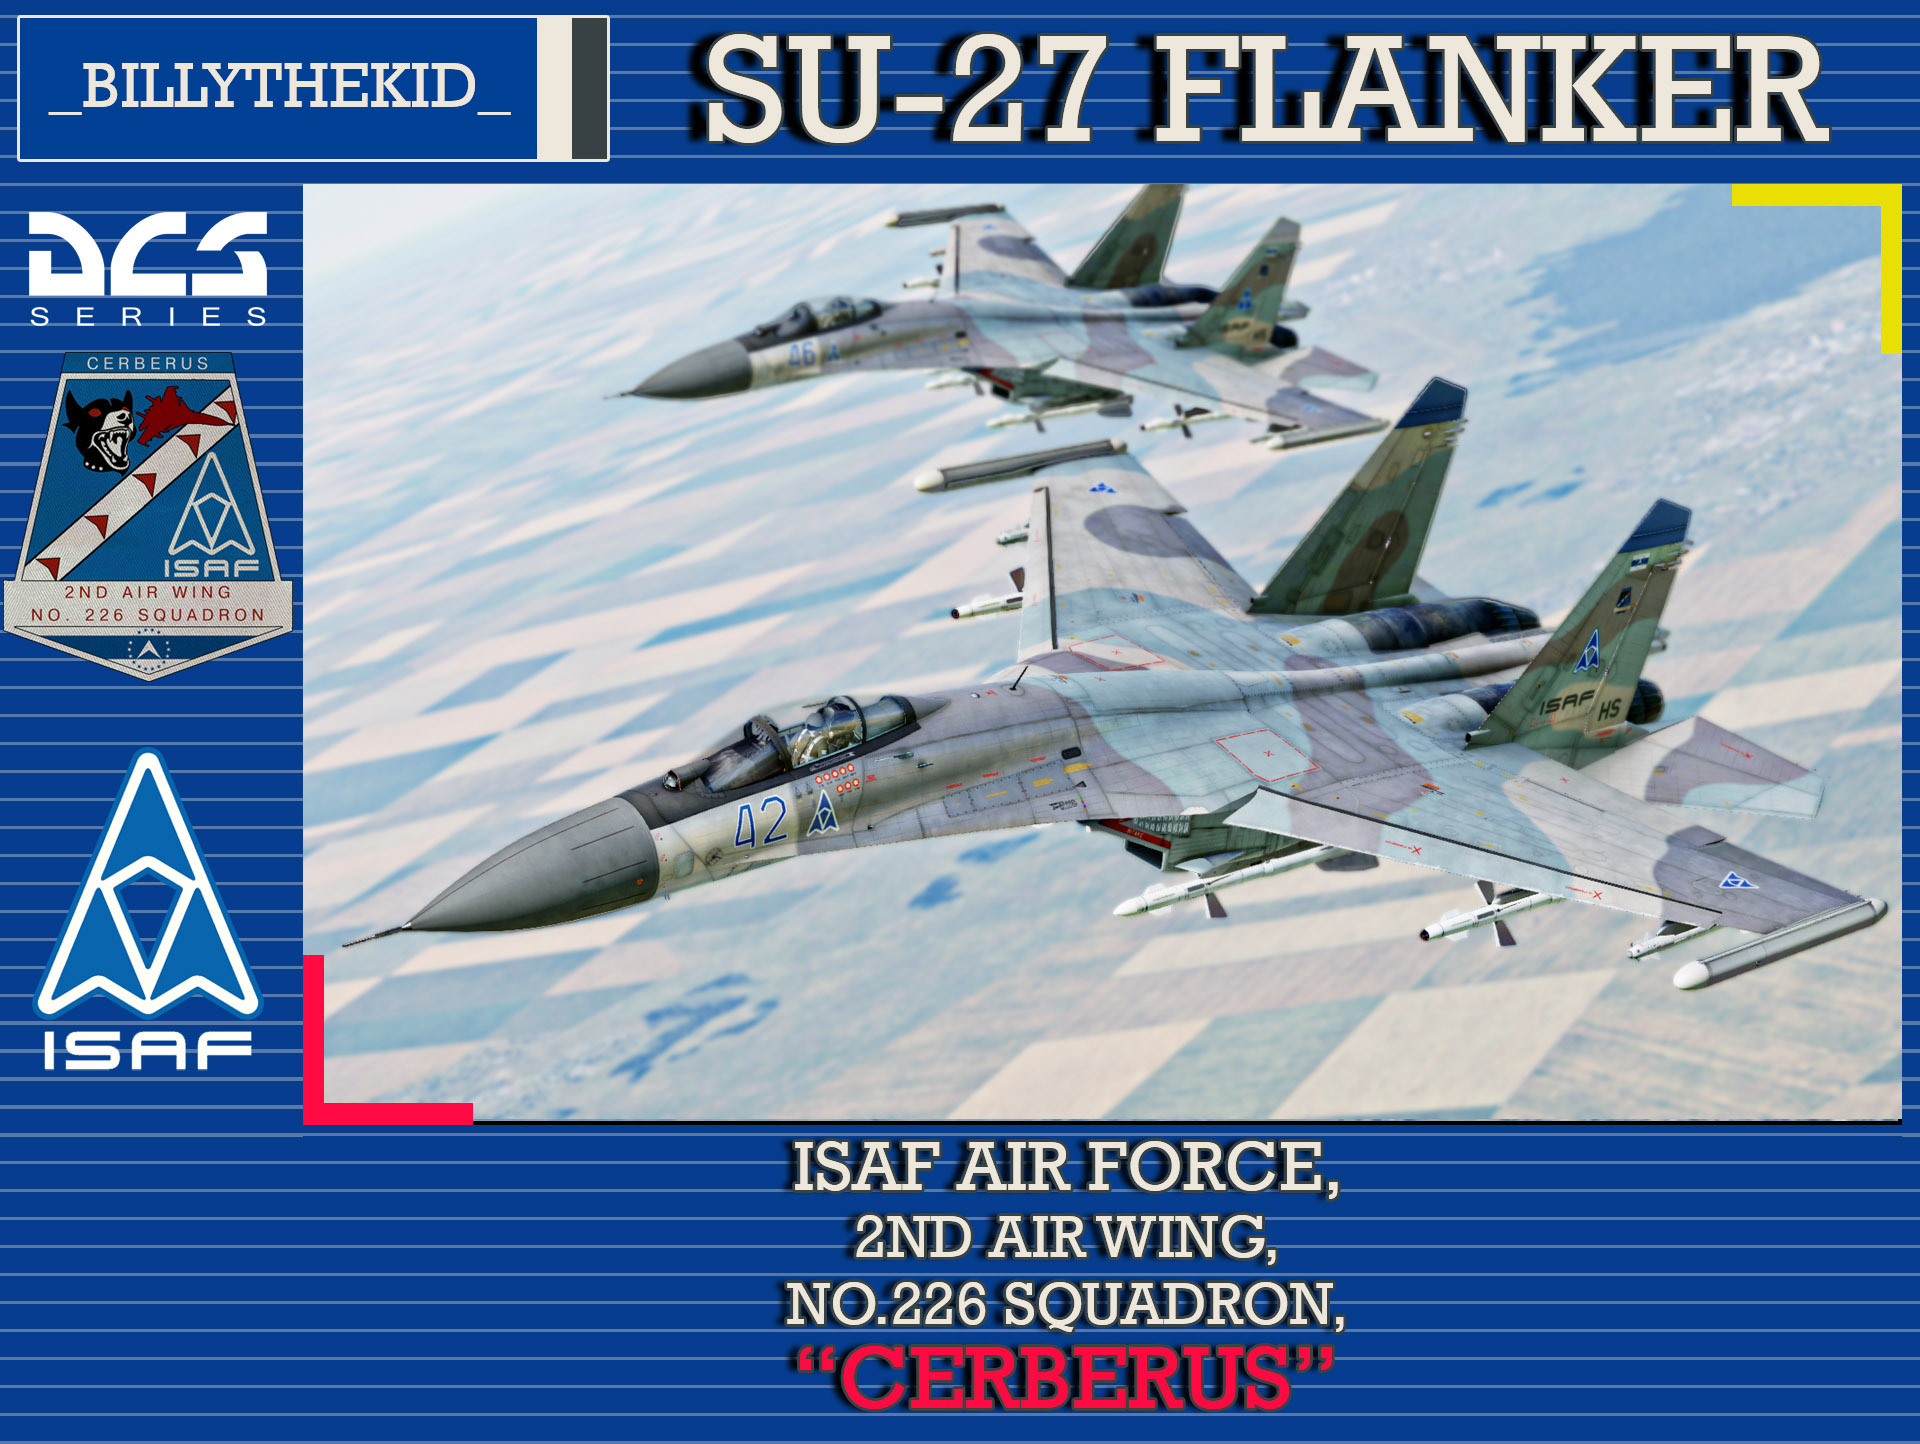 Ace Combat - ISAF Air Force 2nd Air Wing, No.226 Squadron "Cerberus" SU-27 Flanker